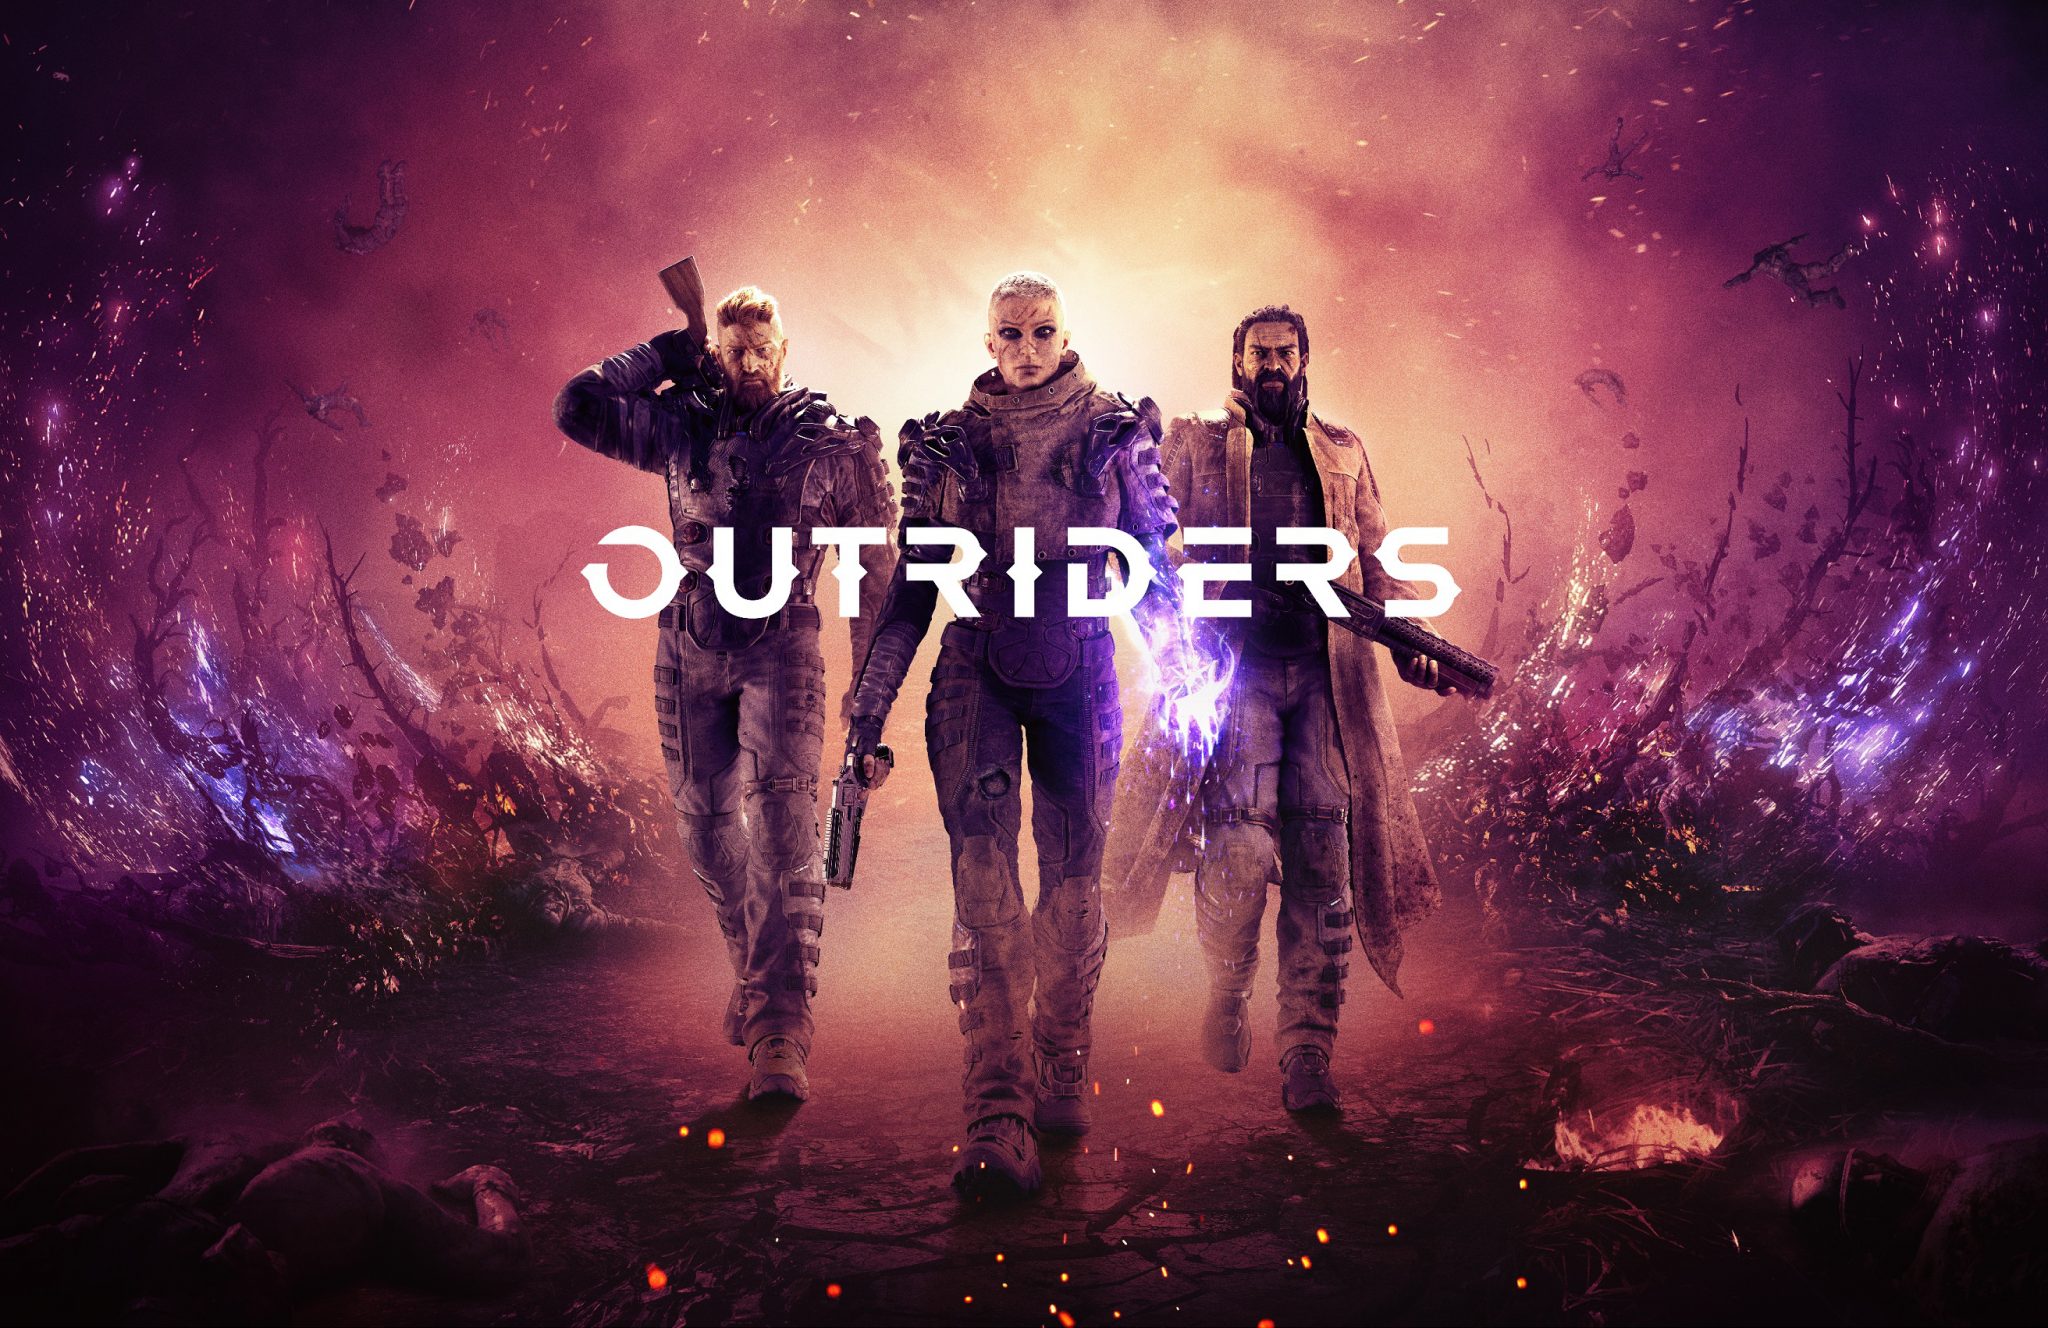 outriders-cover-scaled-e1581441039346